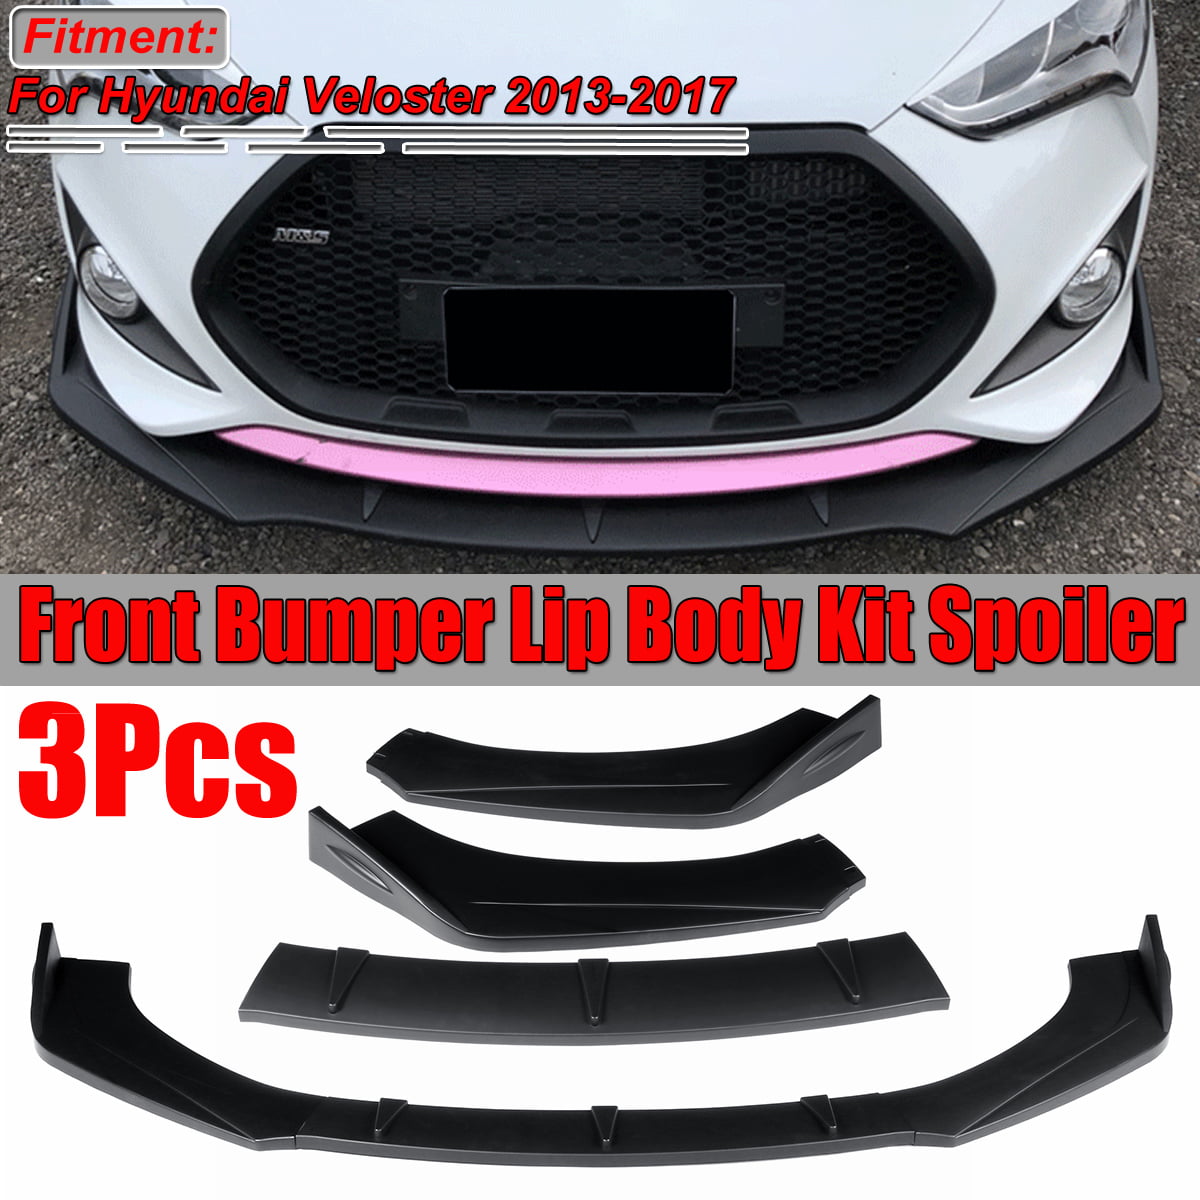 Air-Dam-Chin-Diffuser DriftX Performance 3PCS Front Bumper Lip Kit fit for compatible with 2012-2017 Hyundai Veloster Base Black STP-Style Splitter Trim Protection Spoiler 